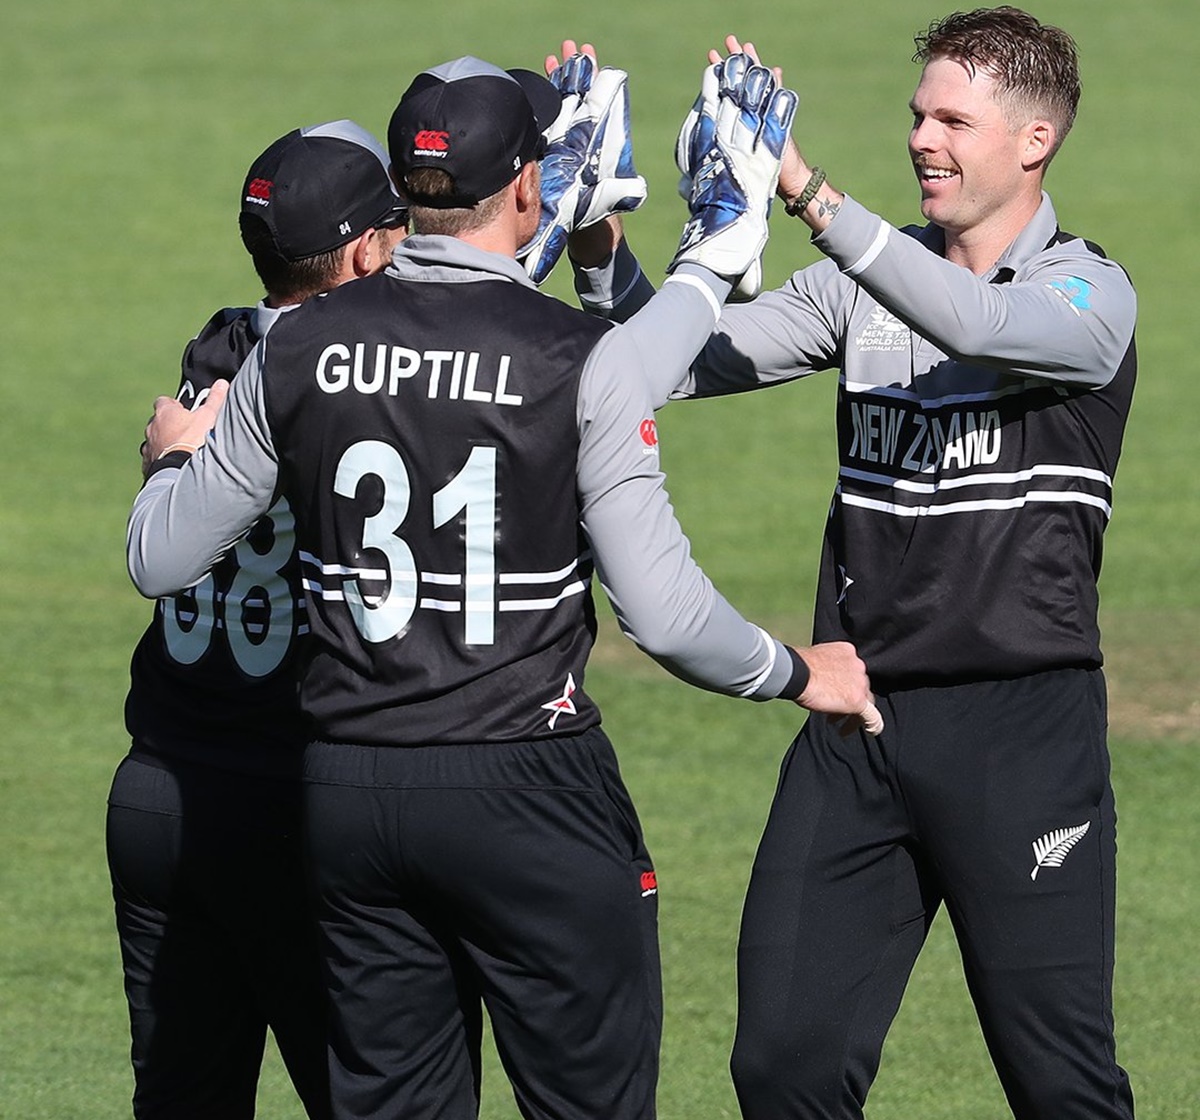 T20 WC: New Zealand first team to seal semis spot